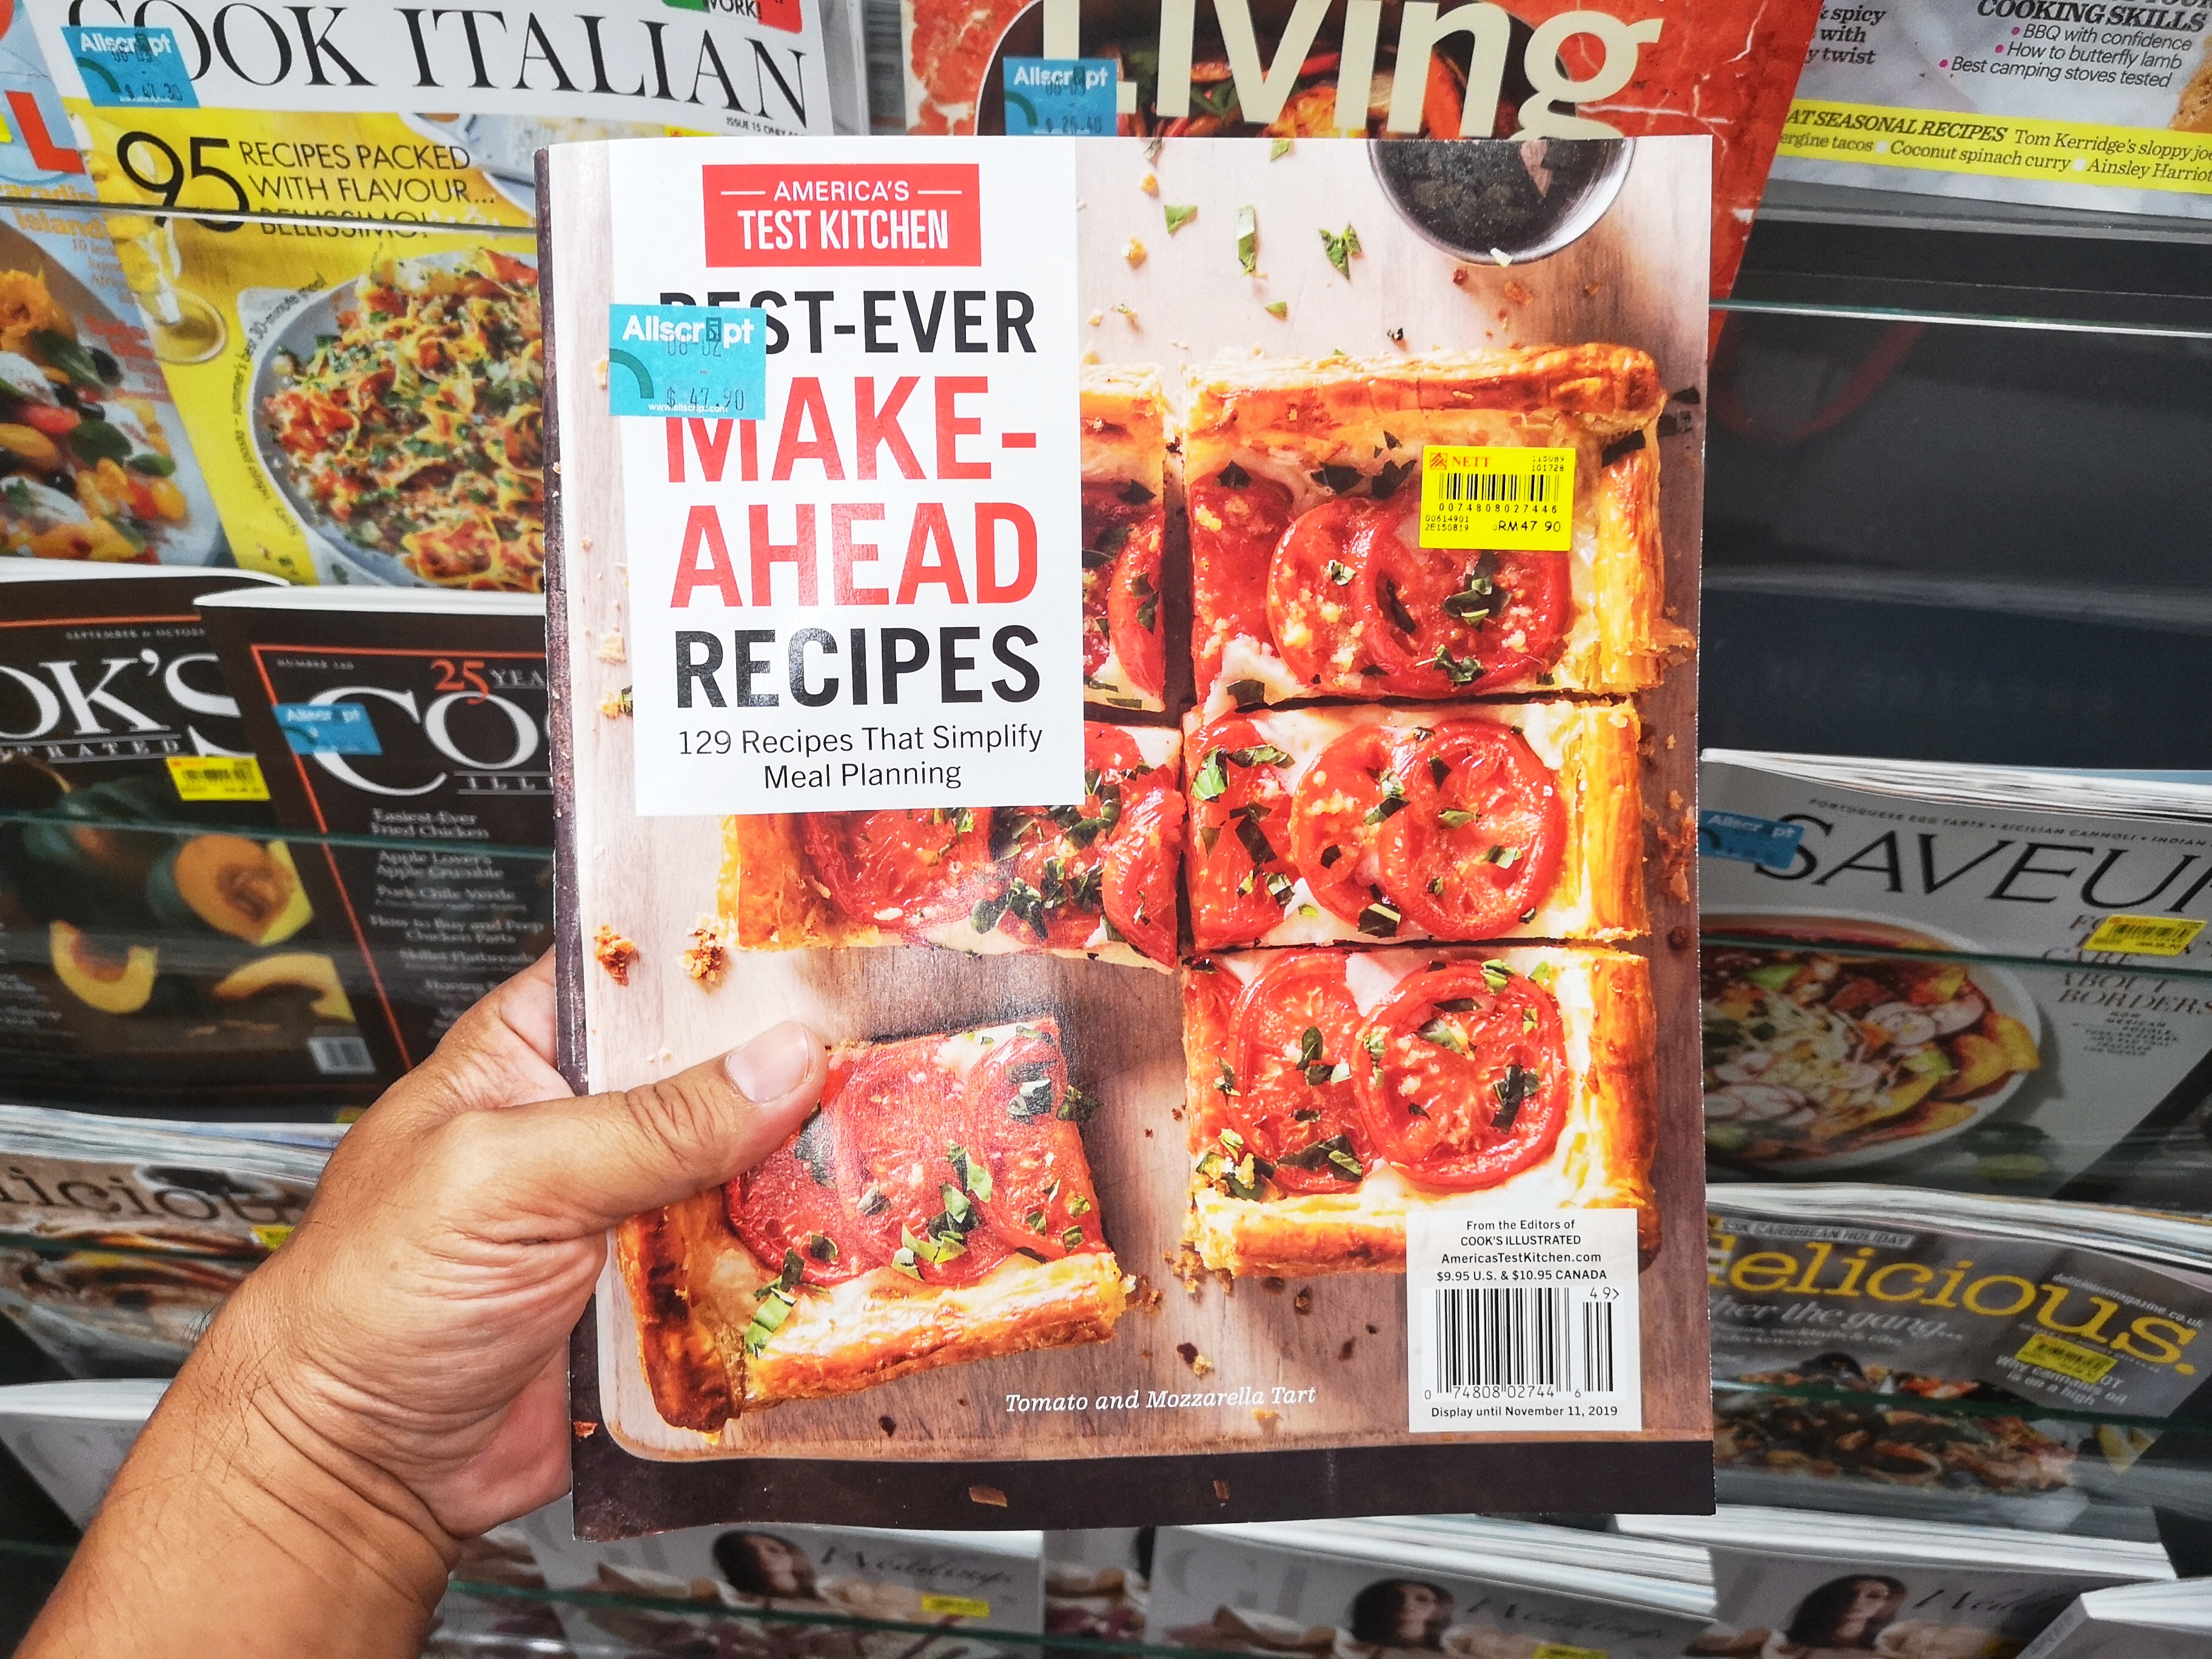 A hand holds up a copy of the America’s Test Kitchen magazine with a sliced pizza on the front cover.